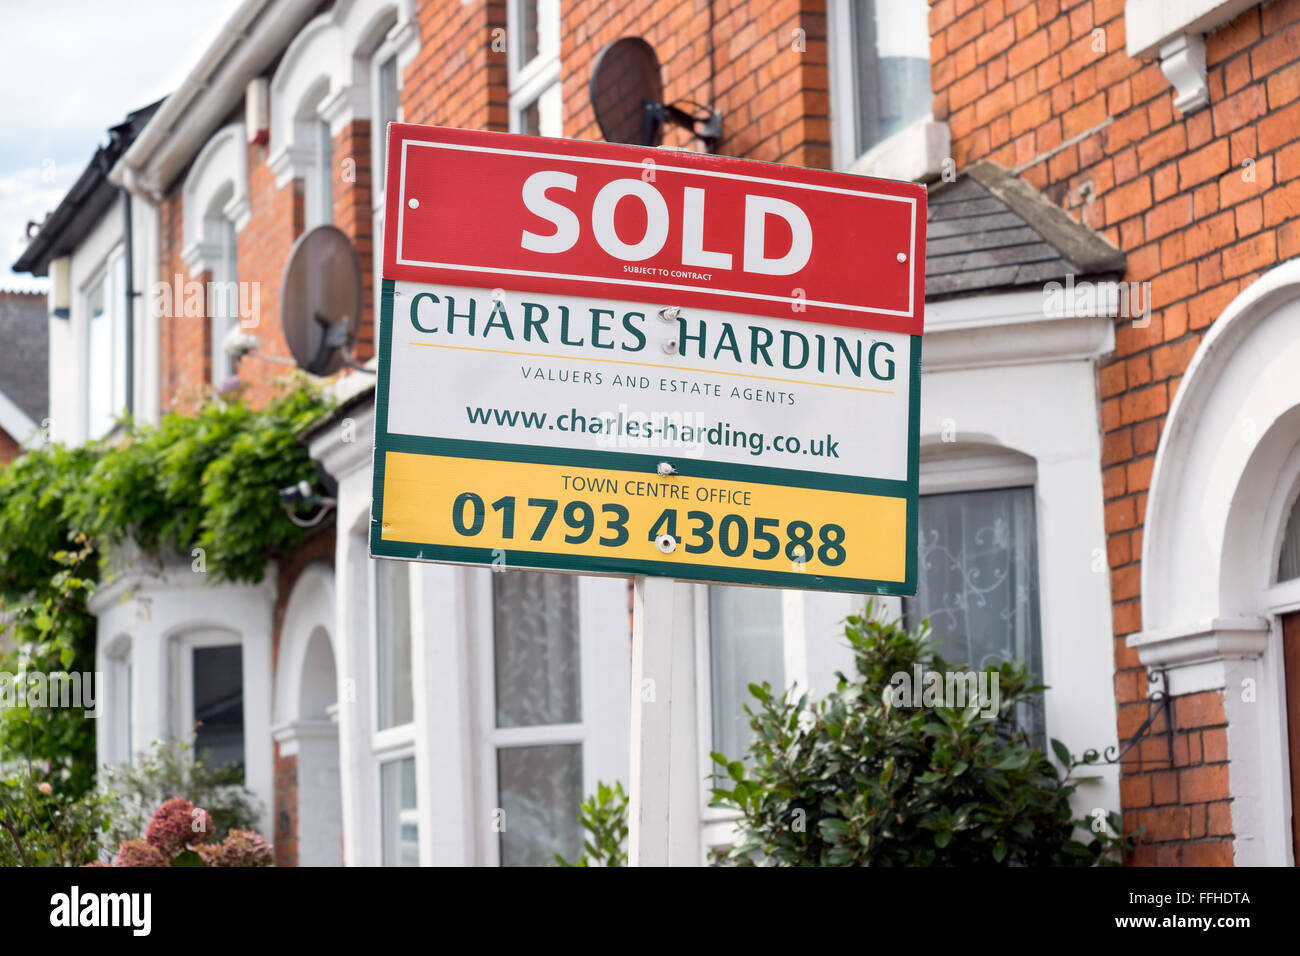 The marketing for sale sign boards of local estate agent Charles Harding outside homes on a street in Swindon Wiltshire UK Stock Photo